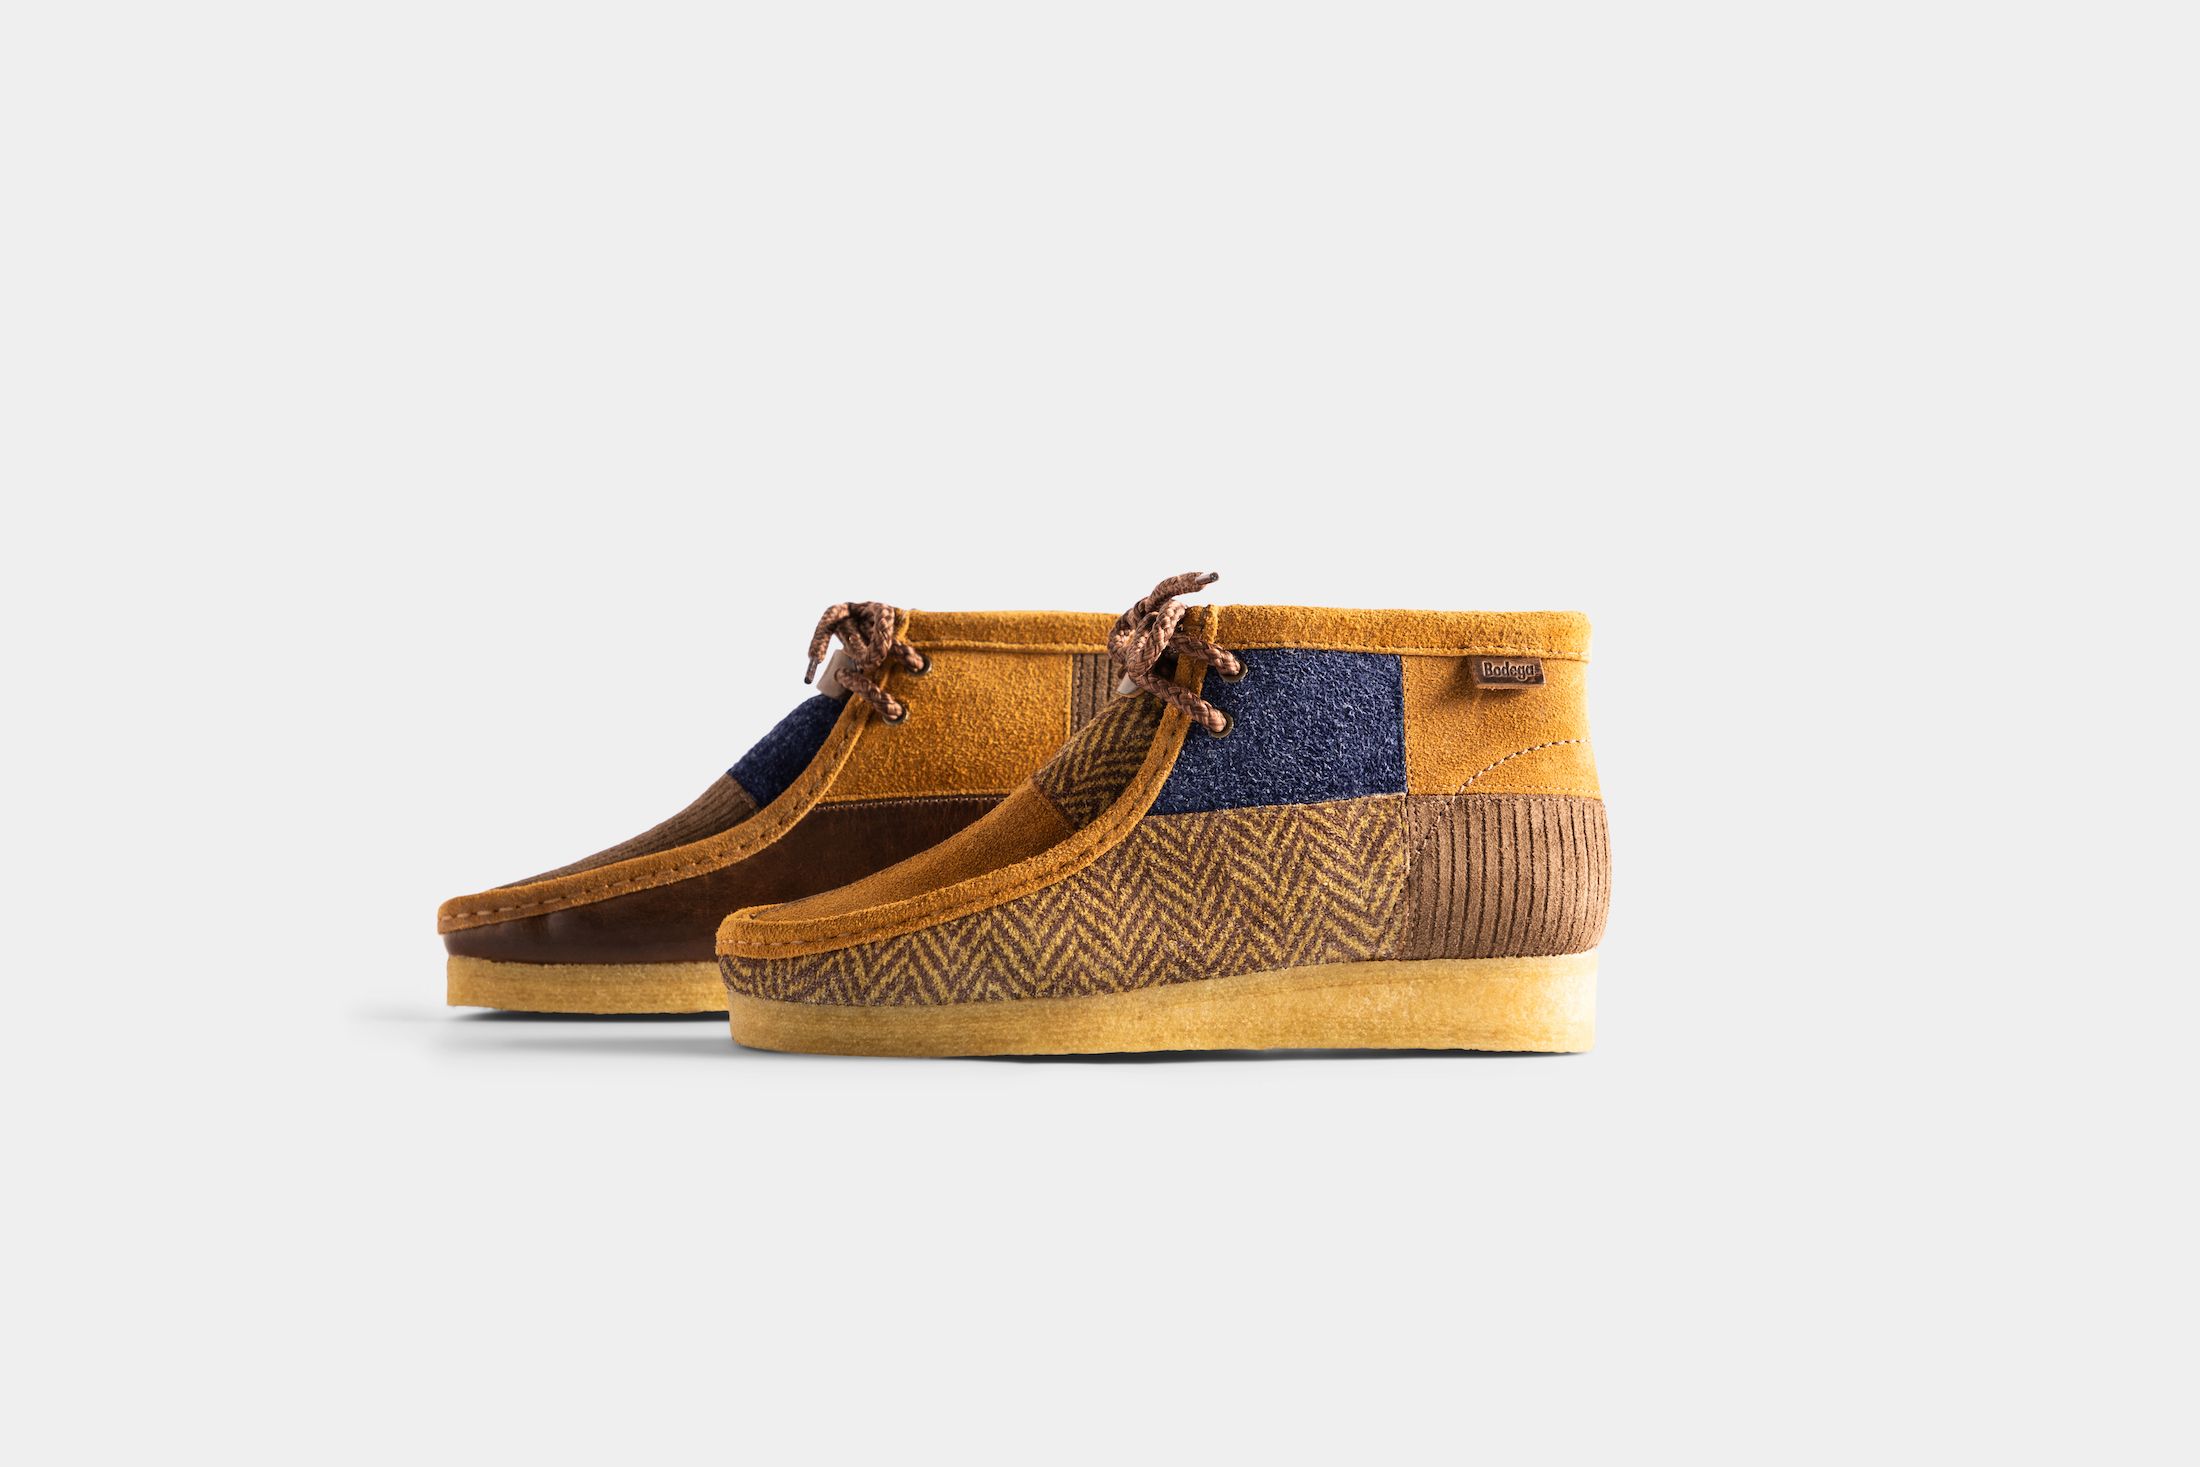 Bodega Made the Clarks Wallabee Look Better Than Ever